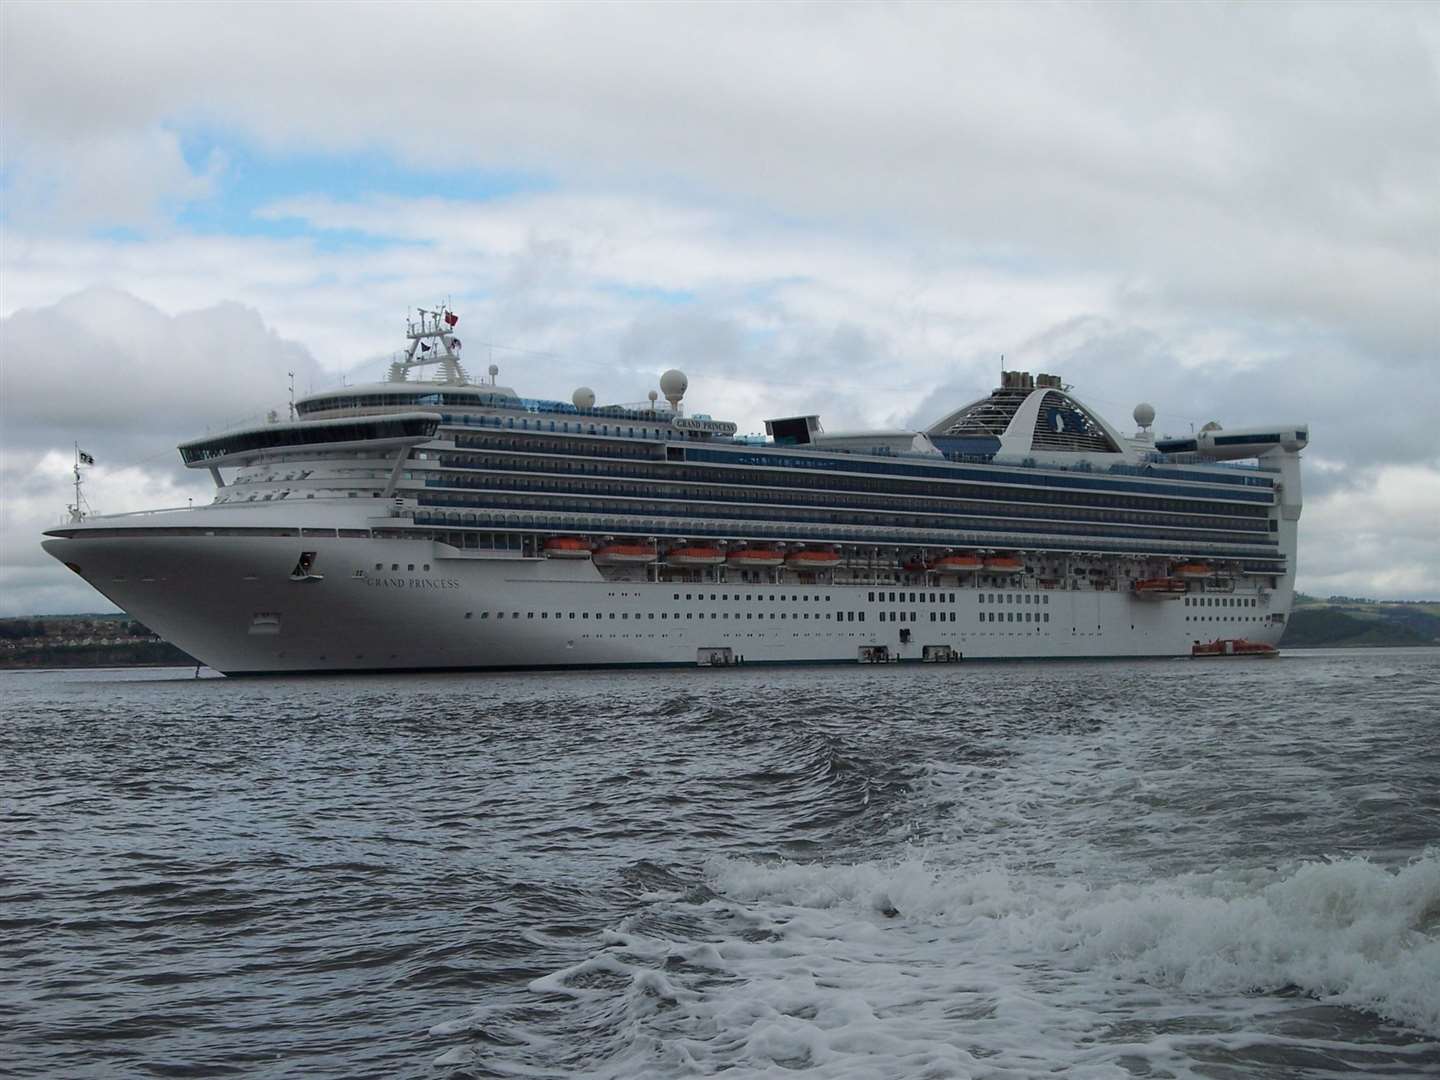 The Grand Princess cruise ship is due to head for Oakland, California. Picture: Wikimedia.